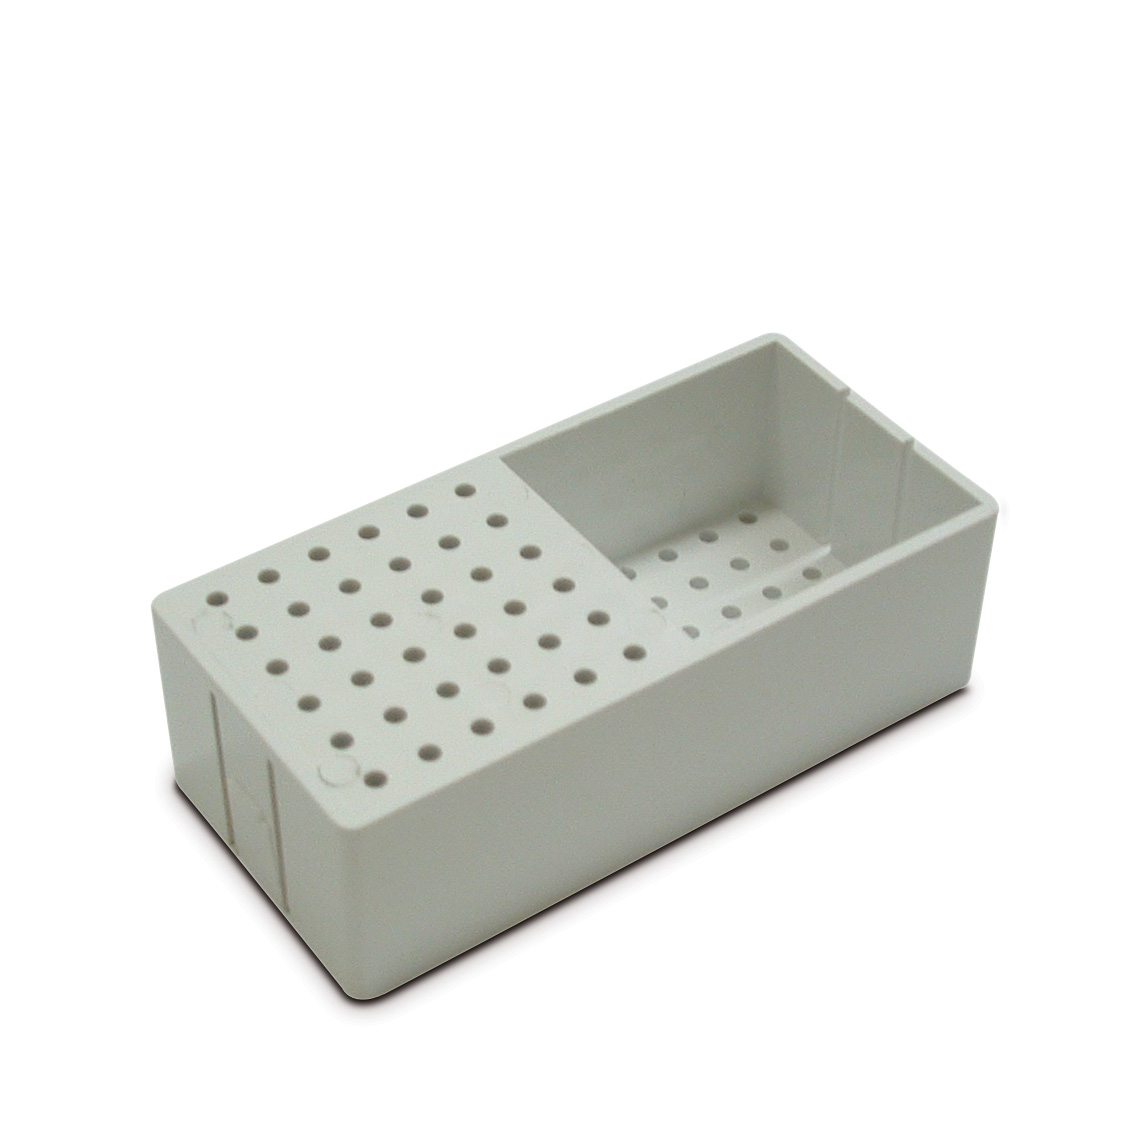 Box Internal accessory for containers for sterilisation and disinfection